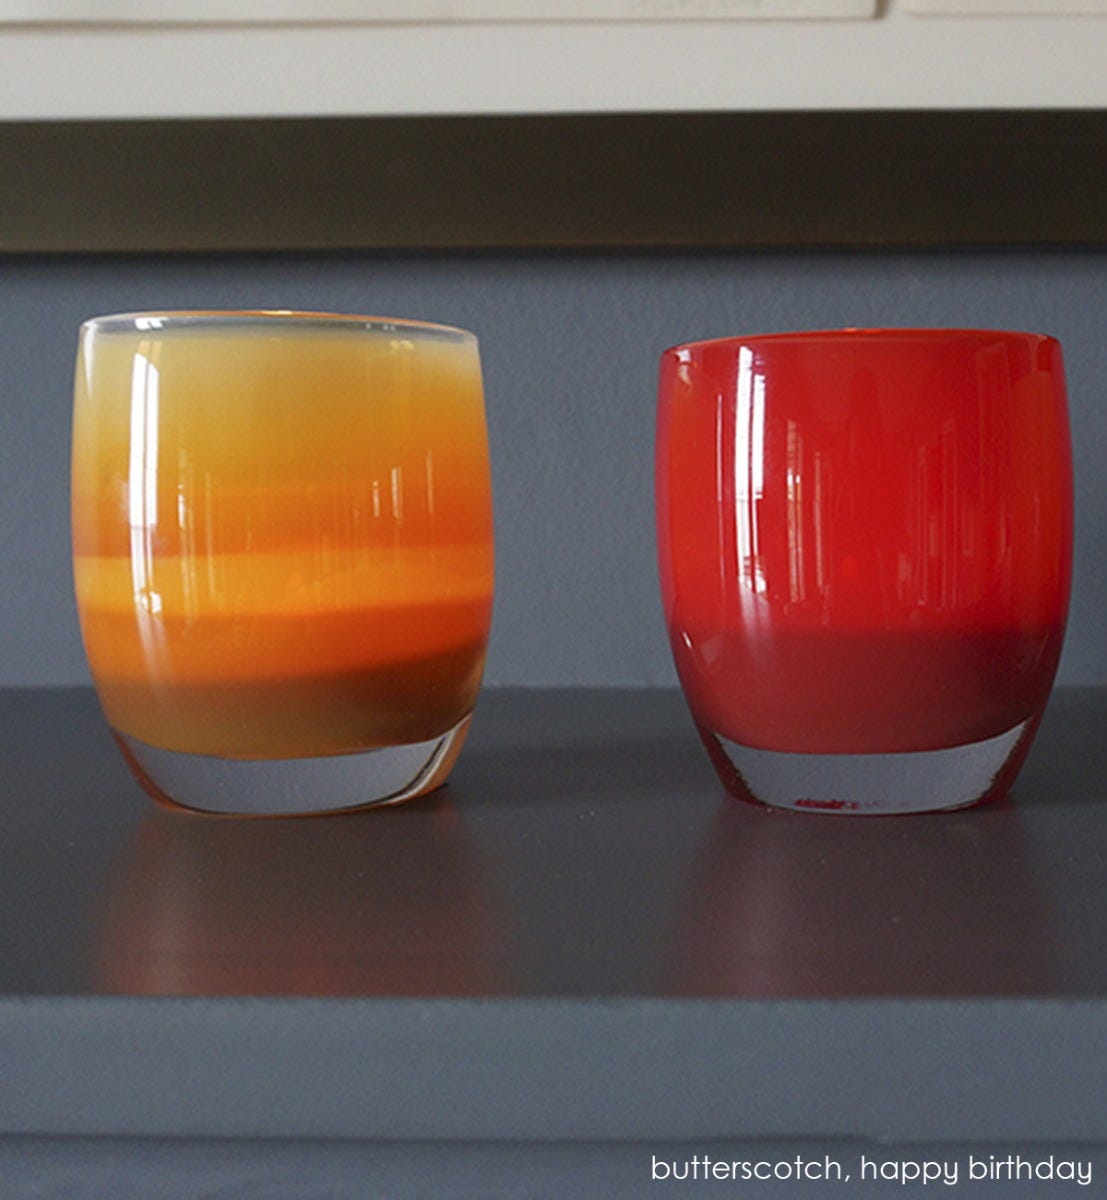 butterscotch hand-blown glass votive candle holder. Paired with happy birthday.